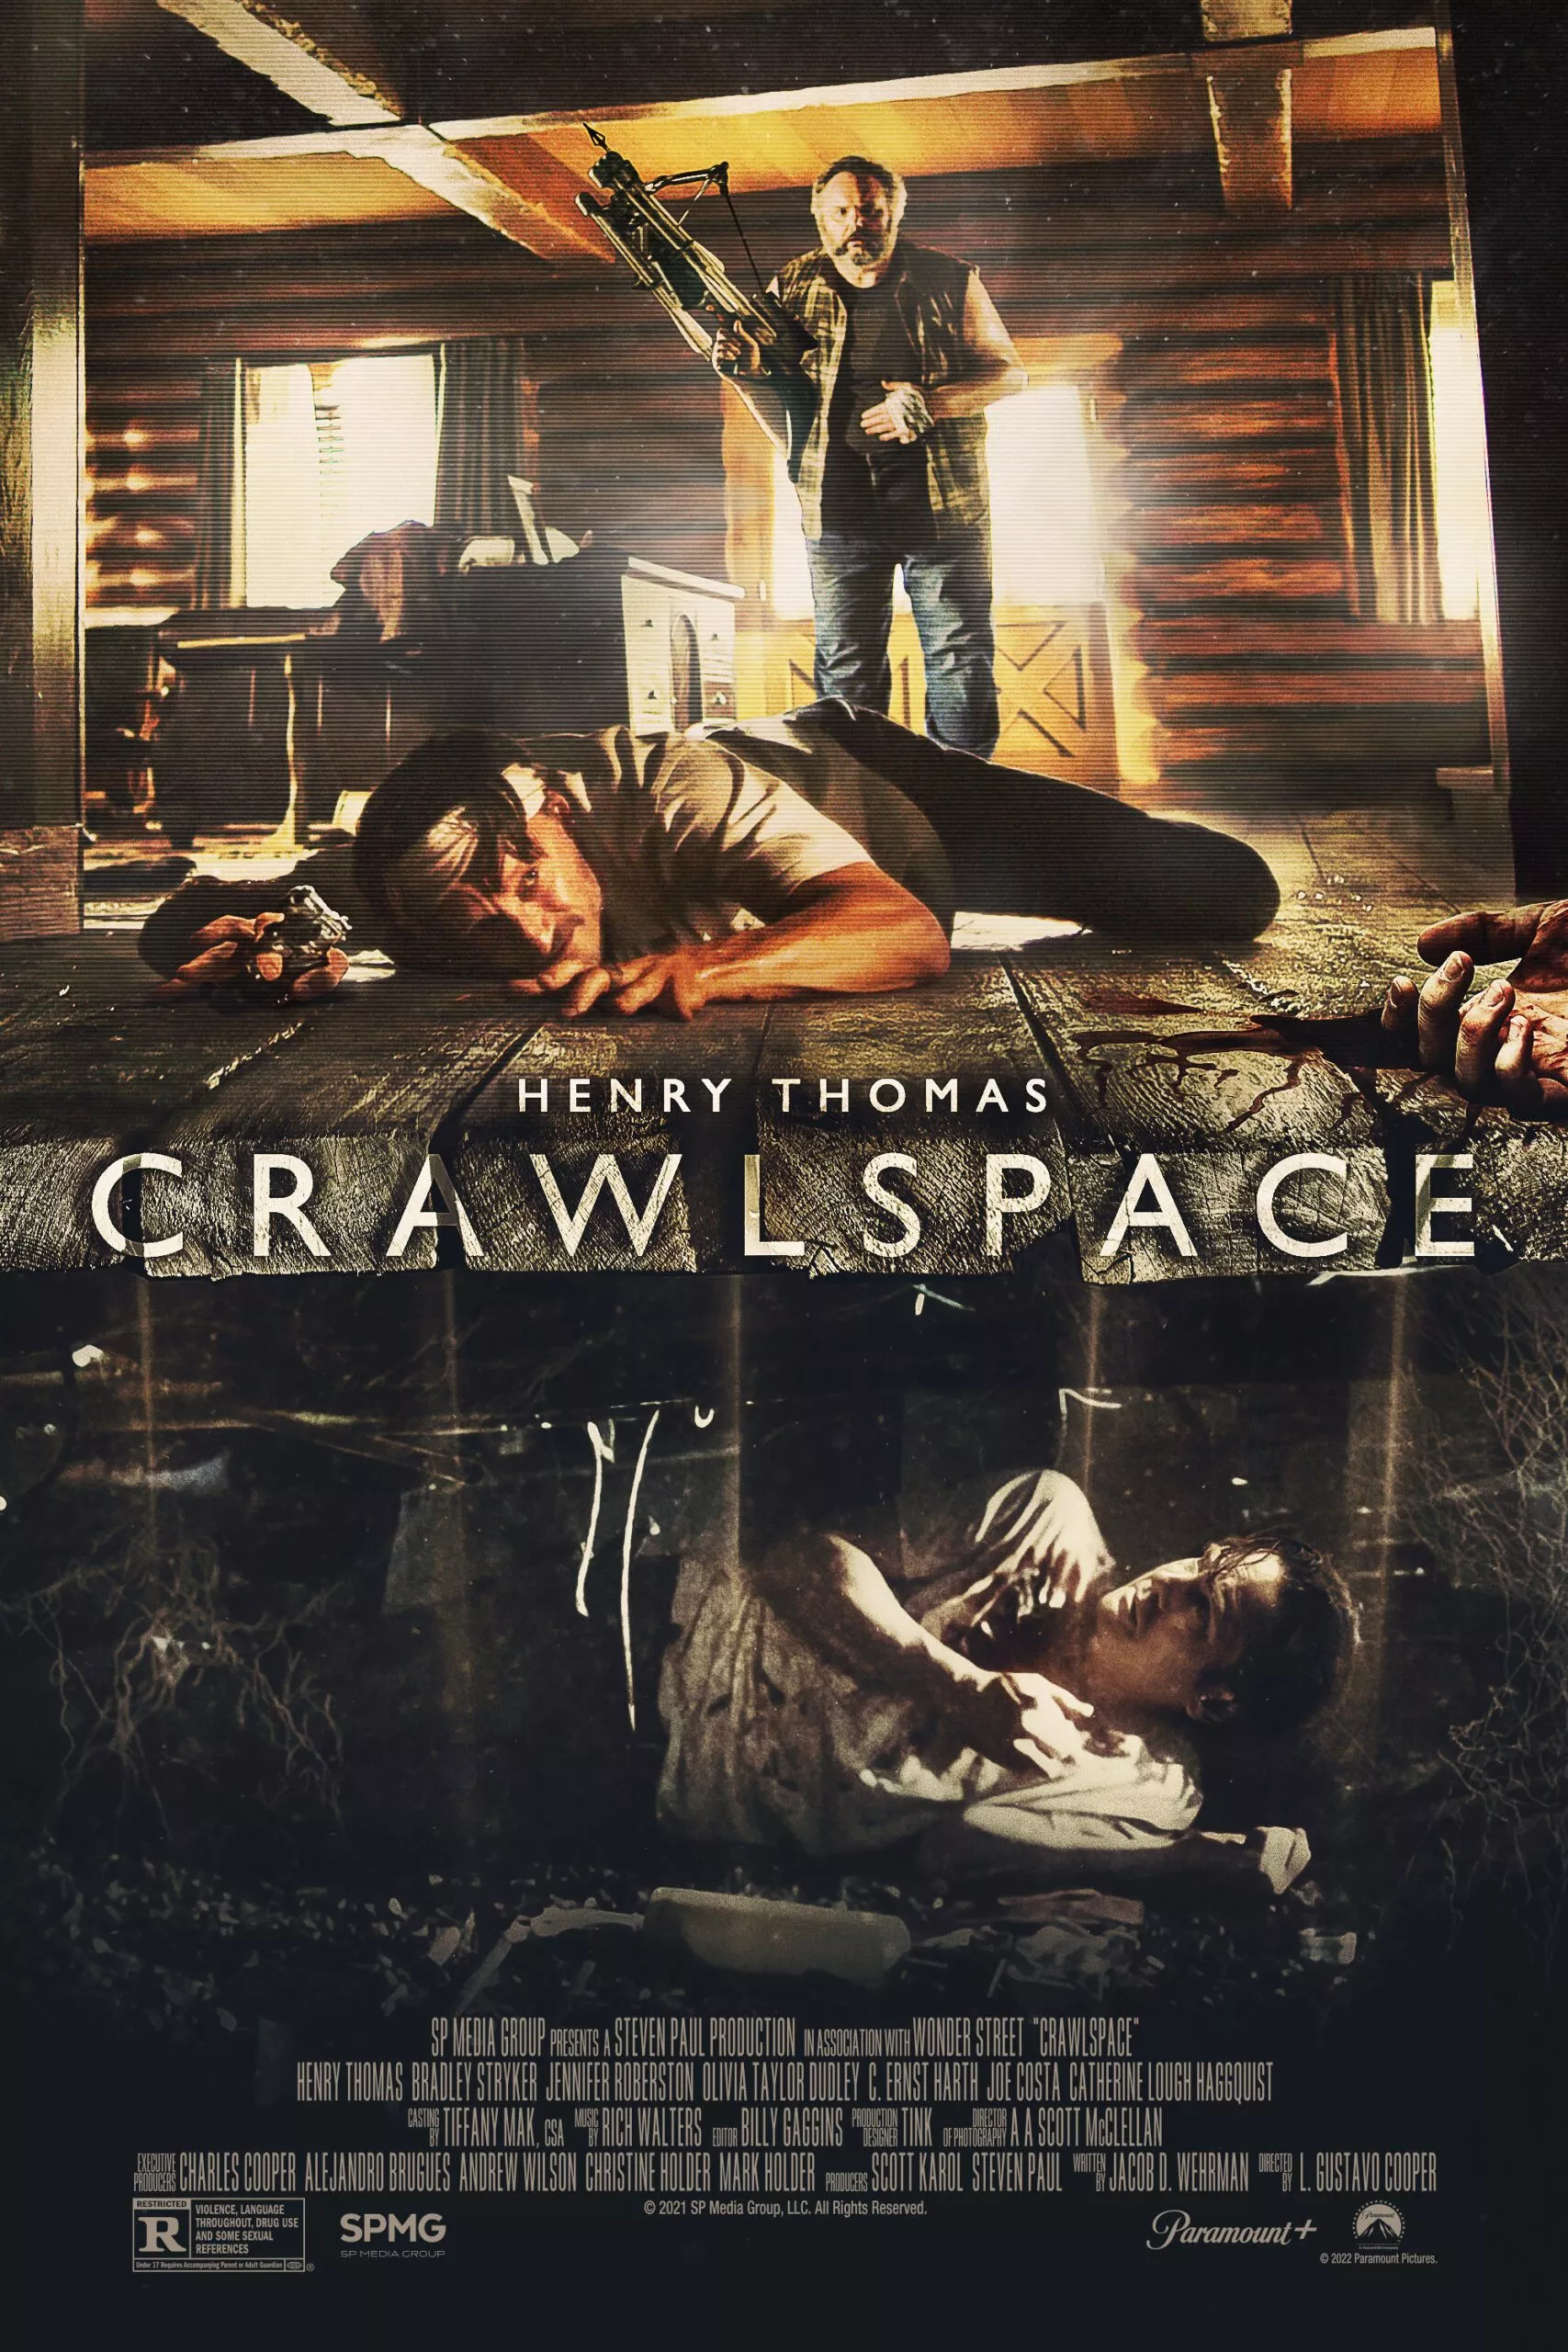 CRAWLSPACE | Official Trailer | Paramount Movies